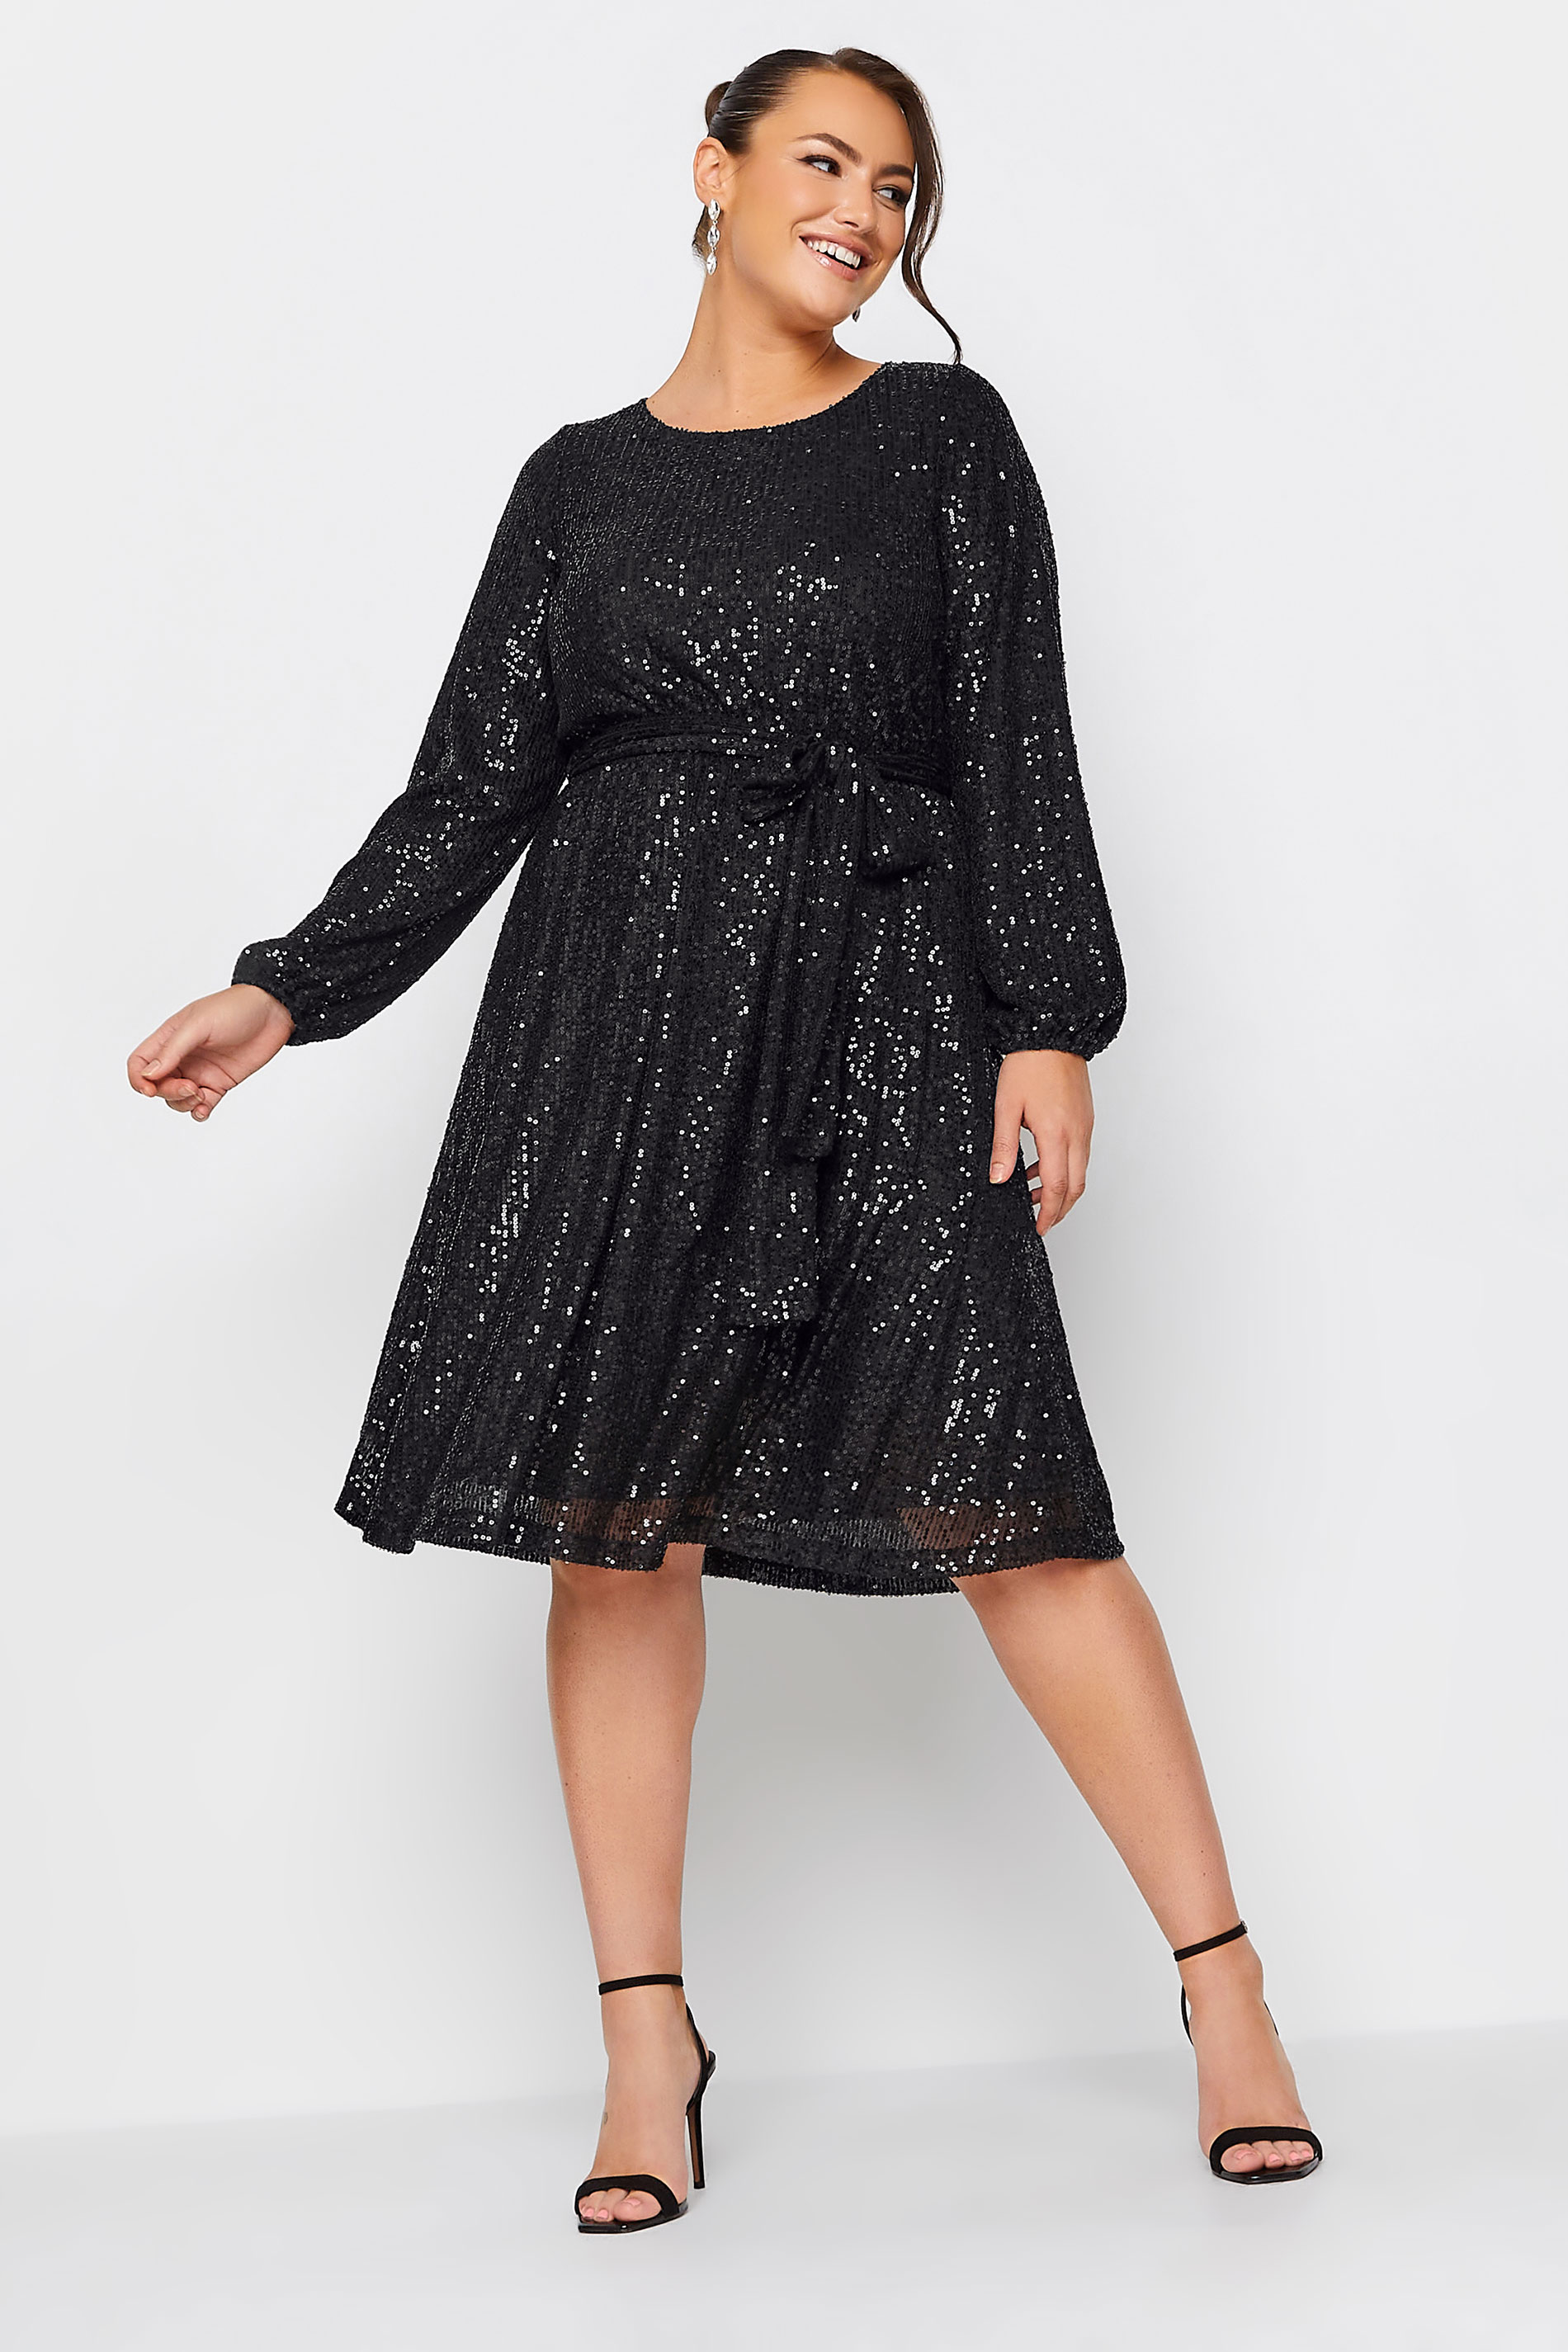 YOURS LONDON Plus Size Black Sequin Skater Dress | Yours Clothing 3